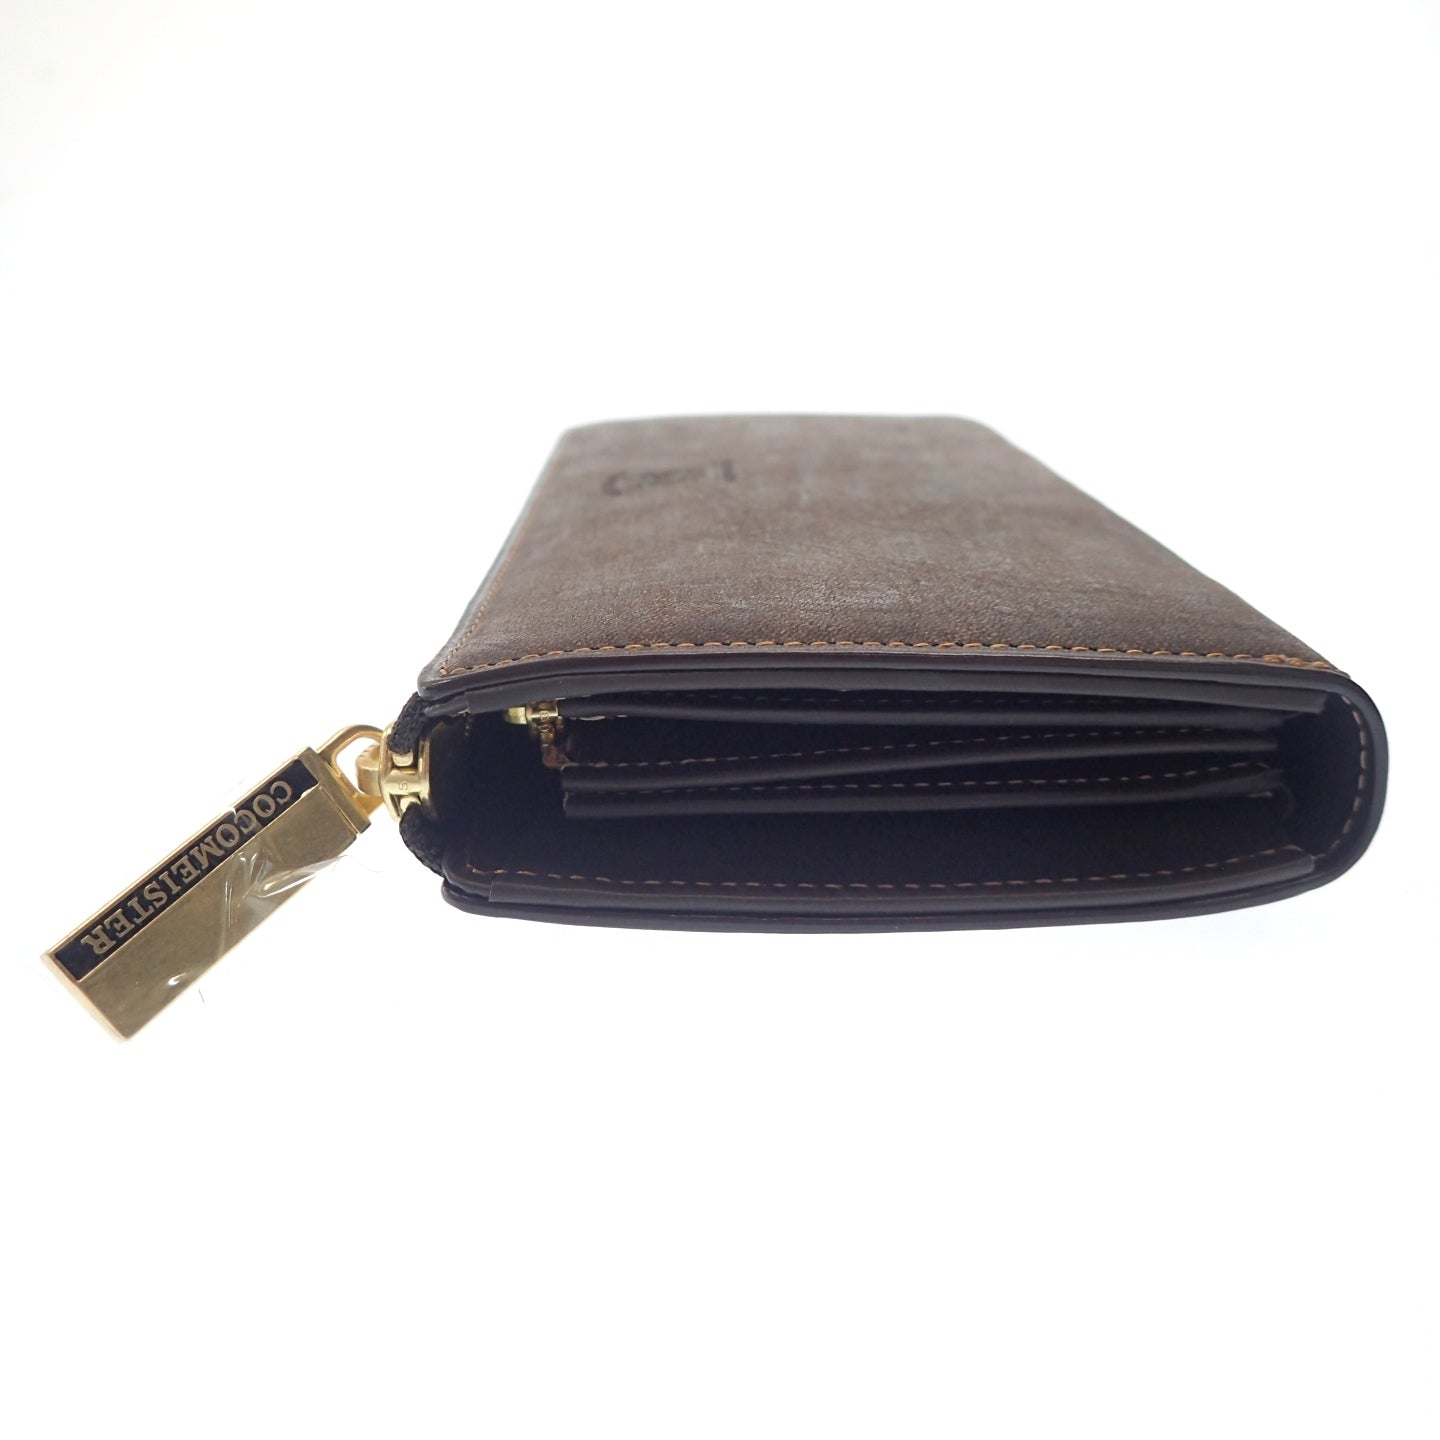 COCOMEISTER long wallet Beyer wallet round zip Betelgeuse series leather with box COCOMEISTER [AFI18] [Used] 